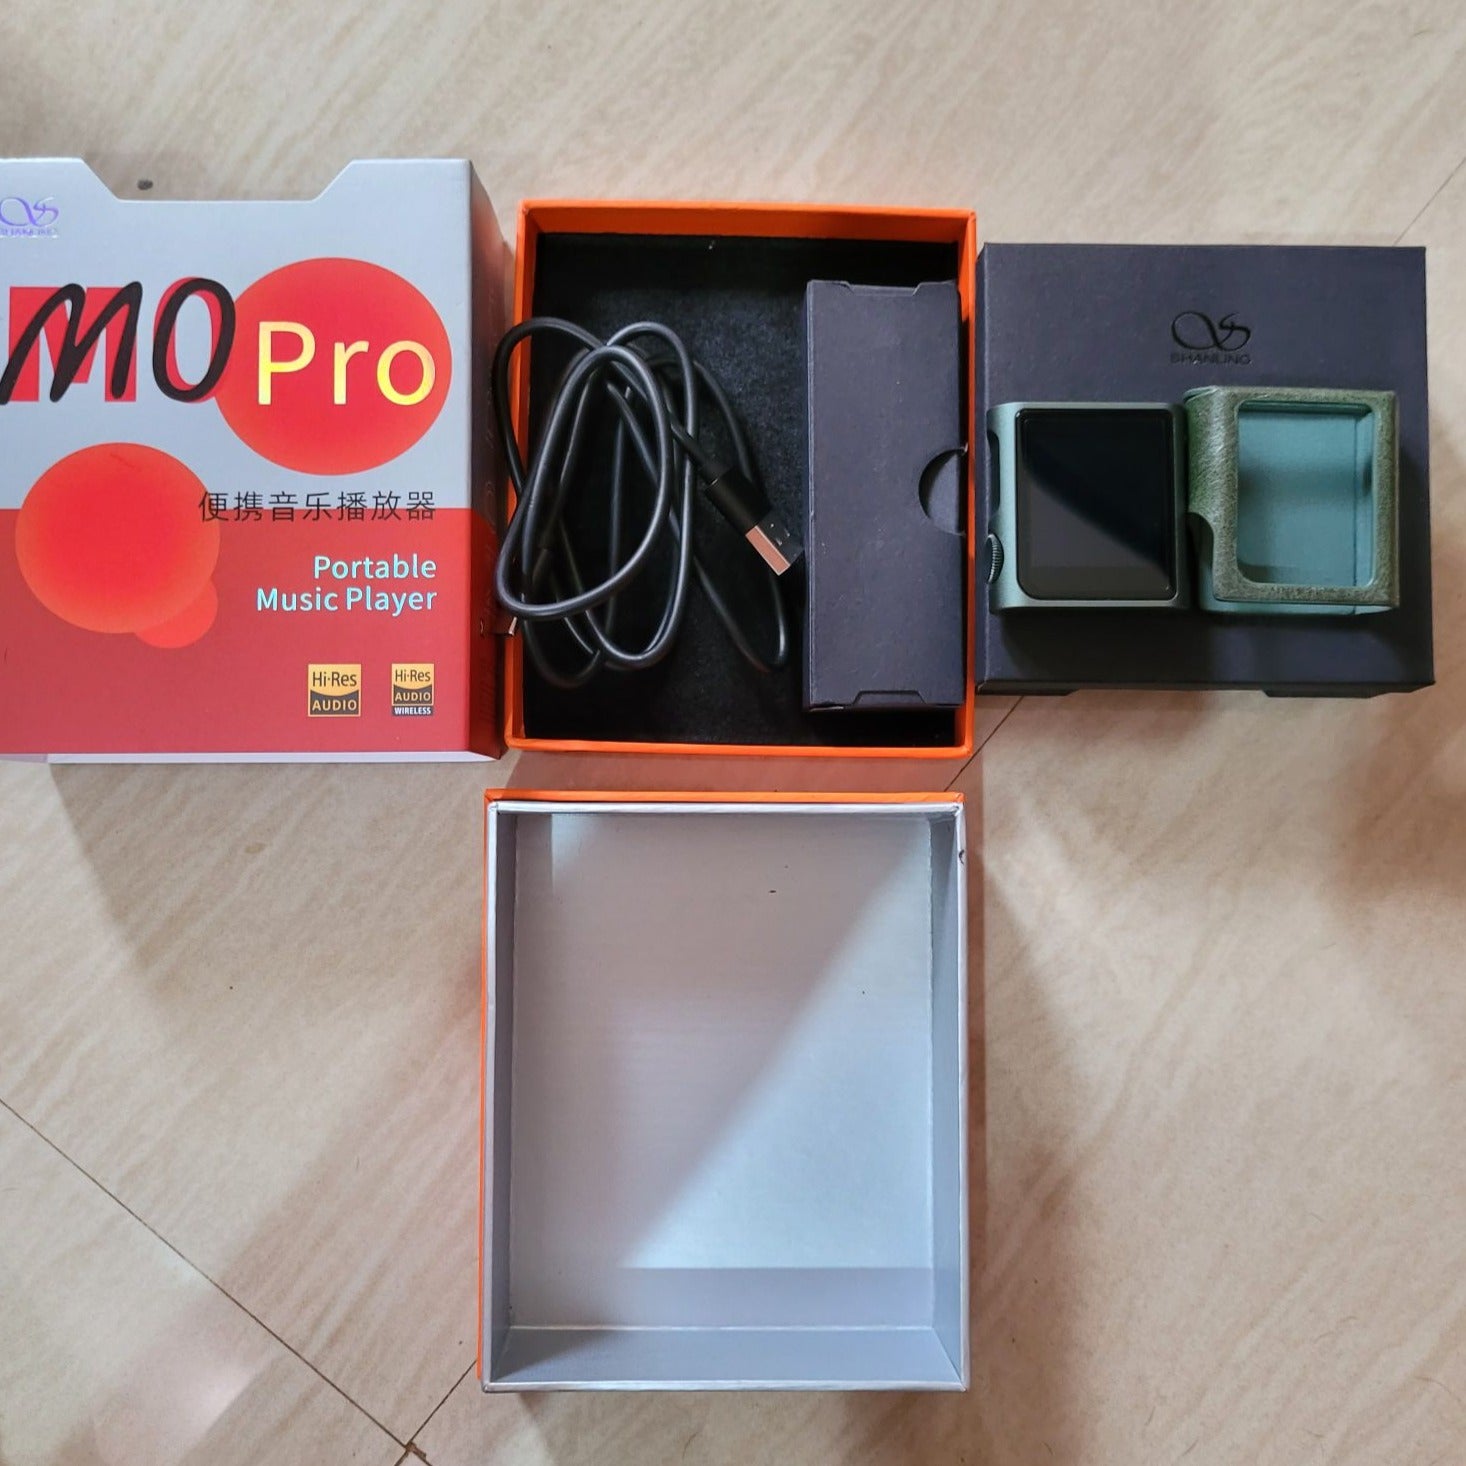 Shanling - M0 Pro + Case (Pre-Owned)